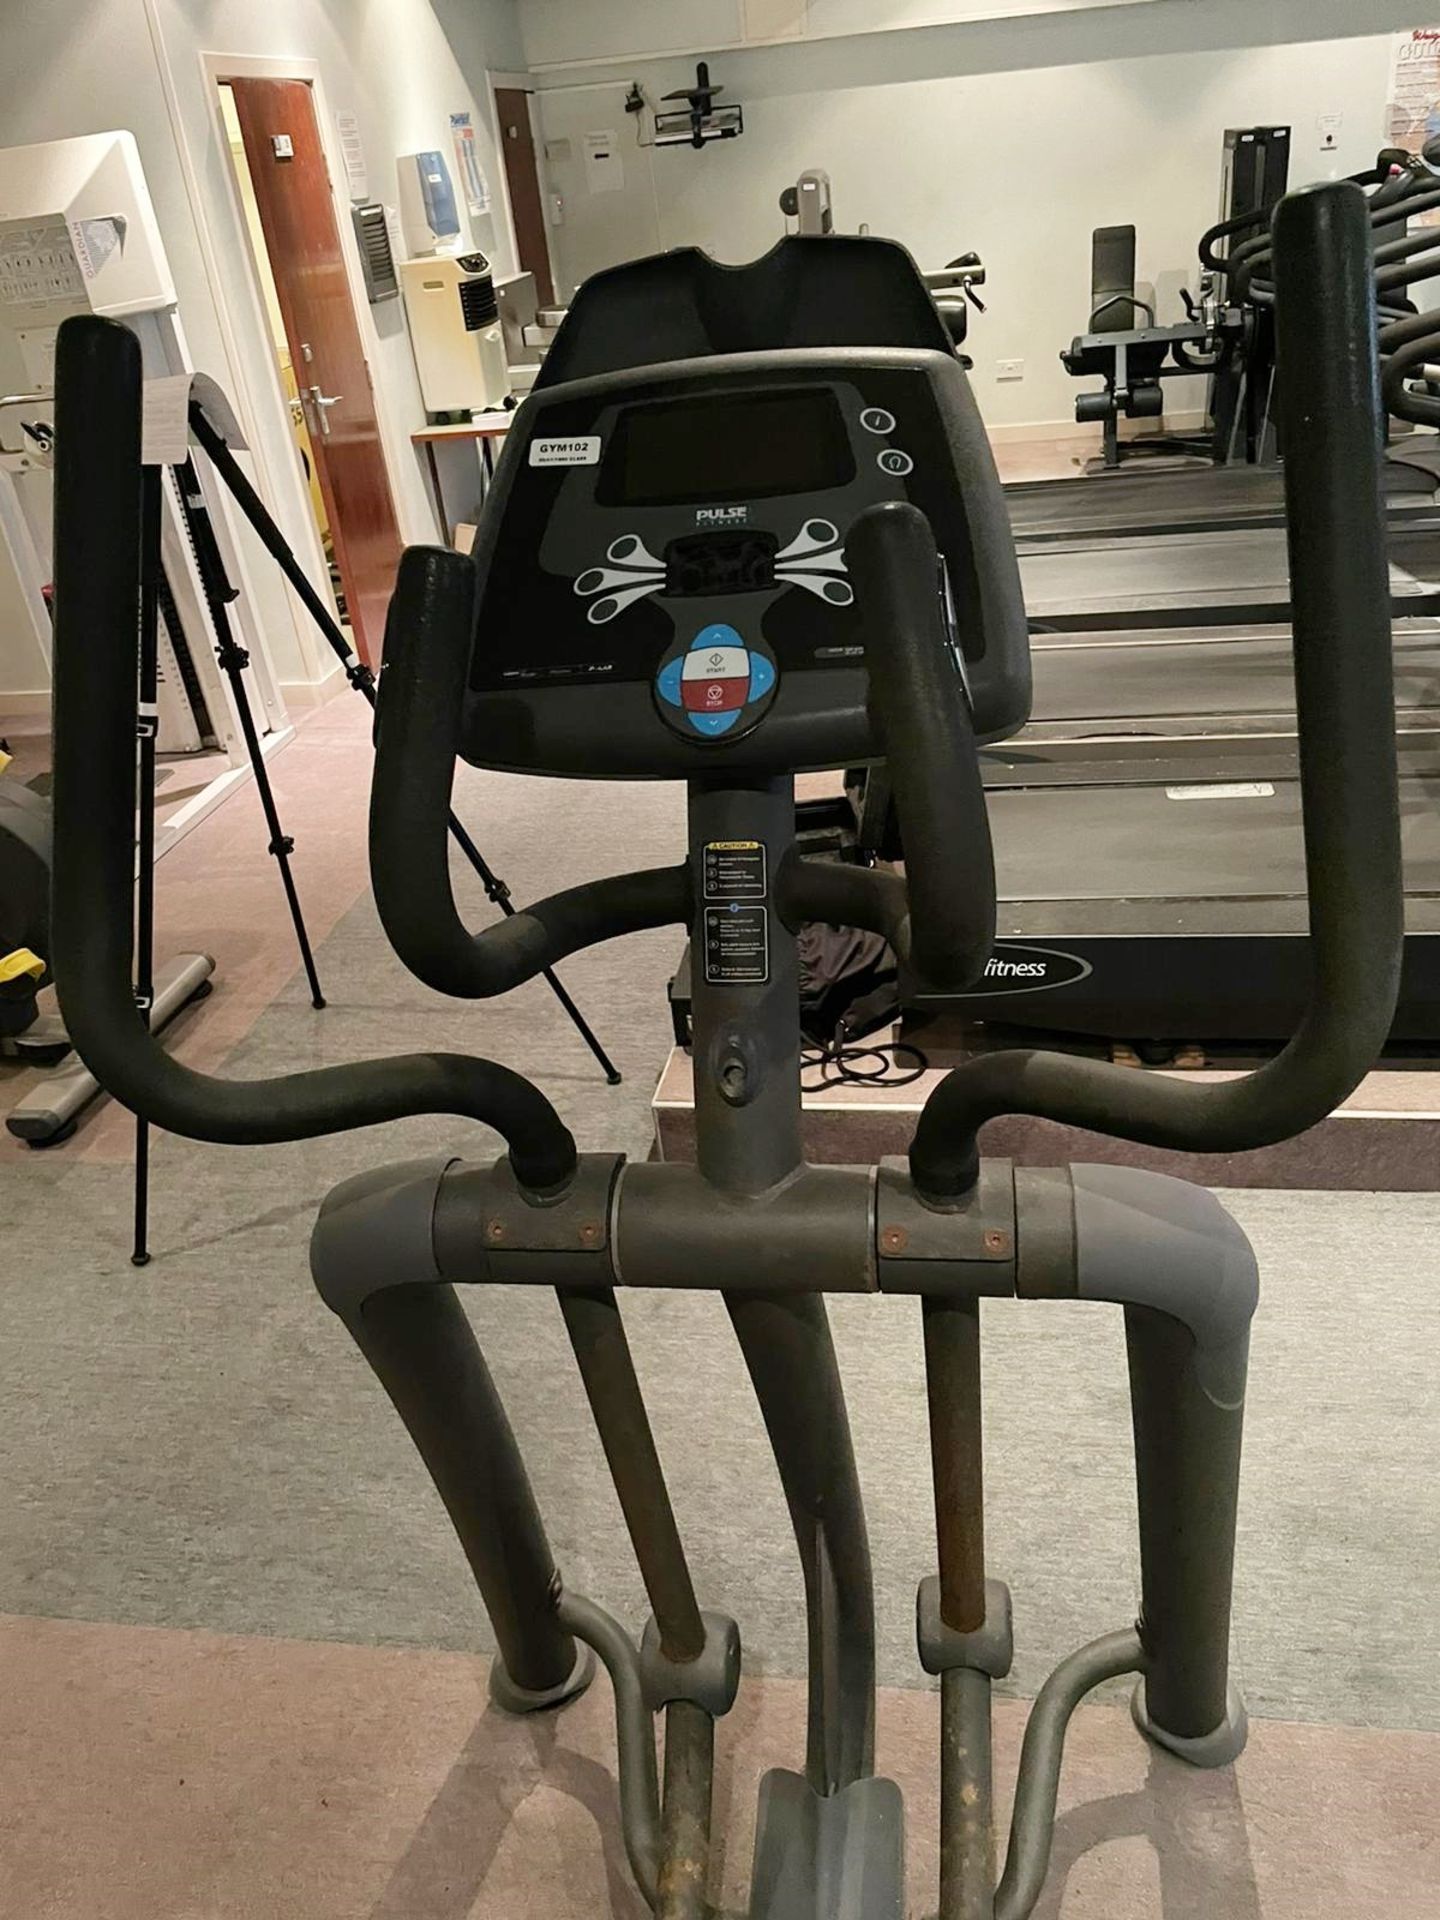 1 x Pulse Fitness Cross Trainer Extreme - Image 4 of 5